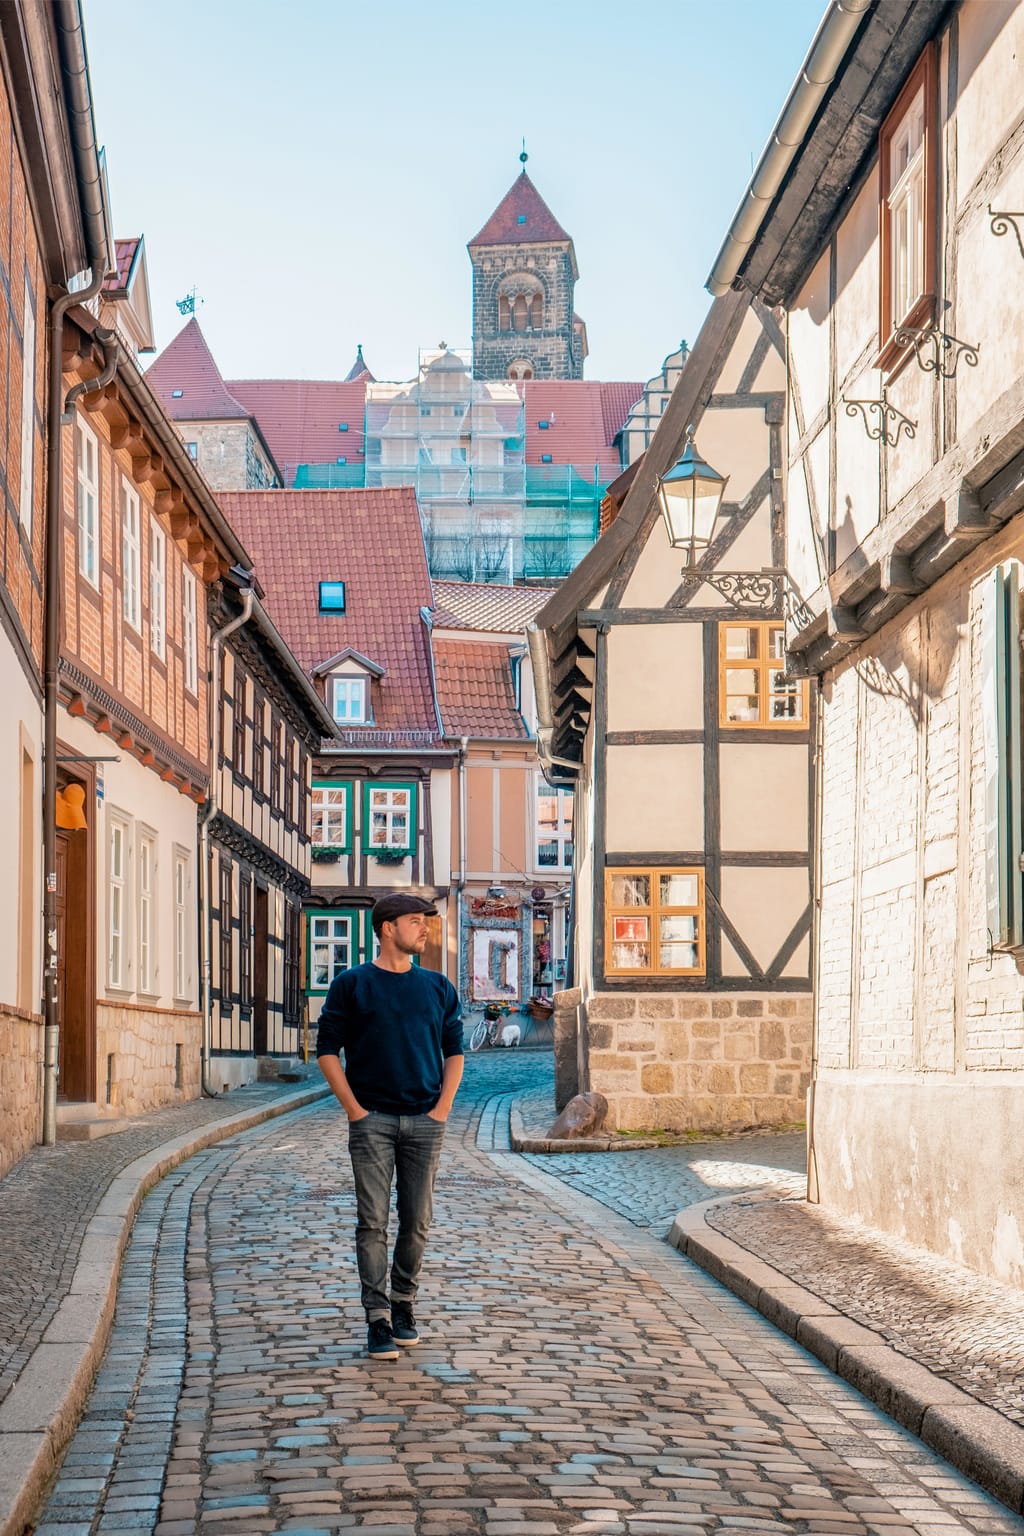 Historical Town of Quedlinburg in Harz Germany